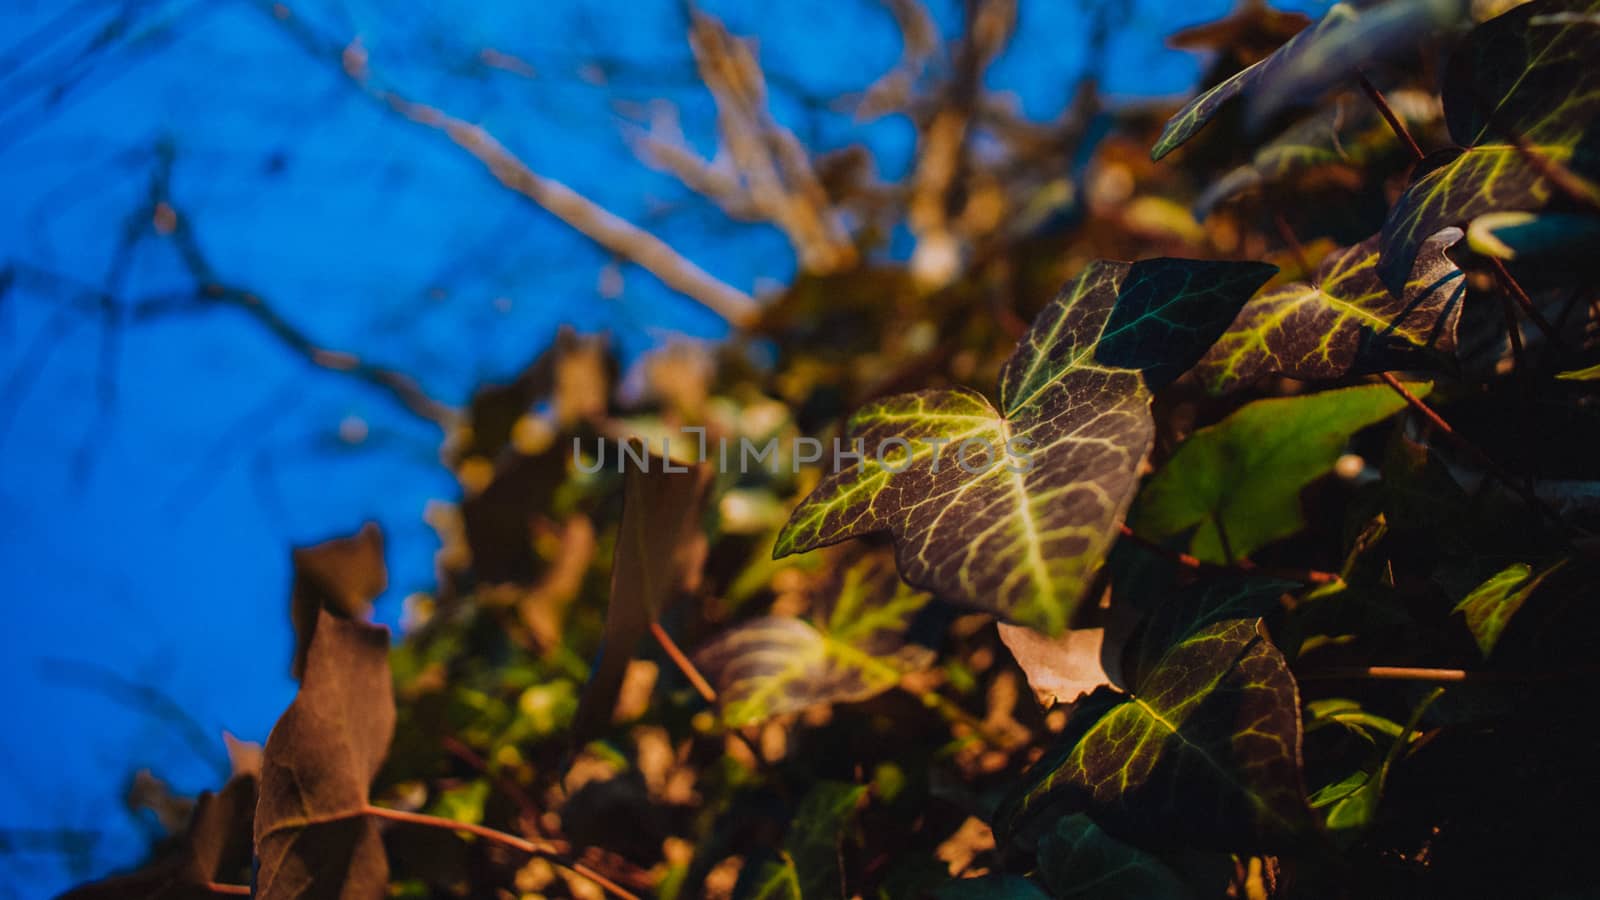 A Close-Up Shot of an Ivy Plant Climbing a Tree On a Clear Blue  by bju12290